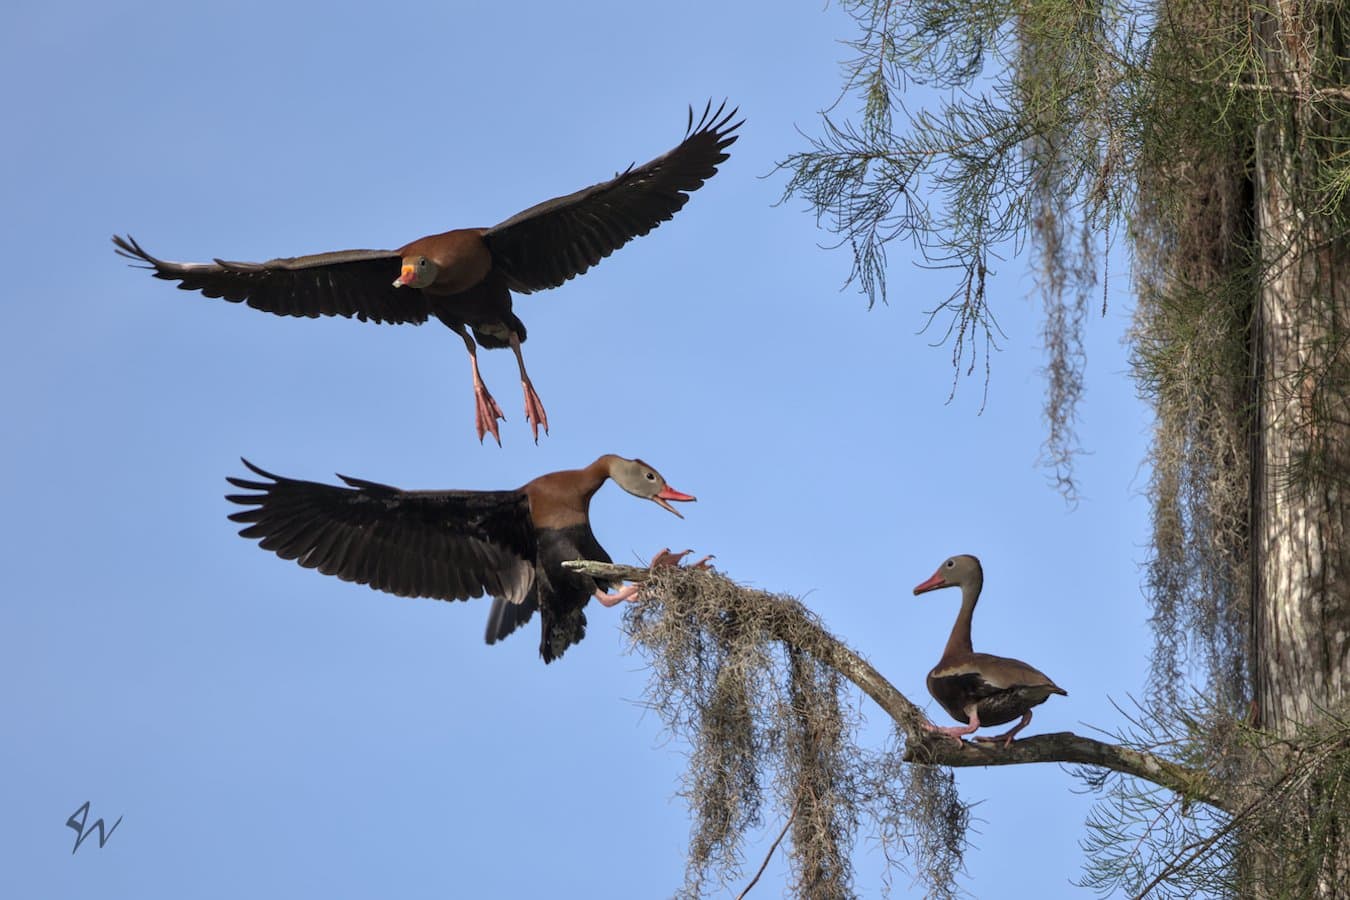 Black-bellied Whistling Duck flies close above another while a duck watches upon high branch.